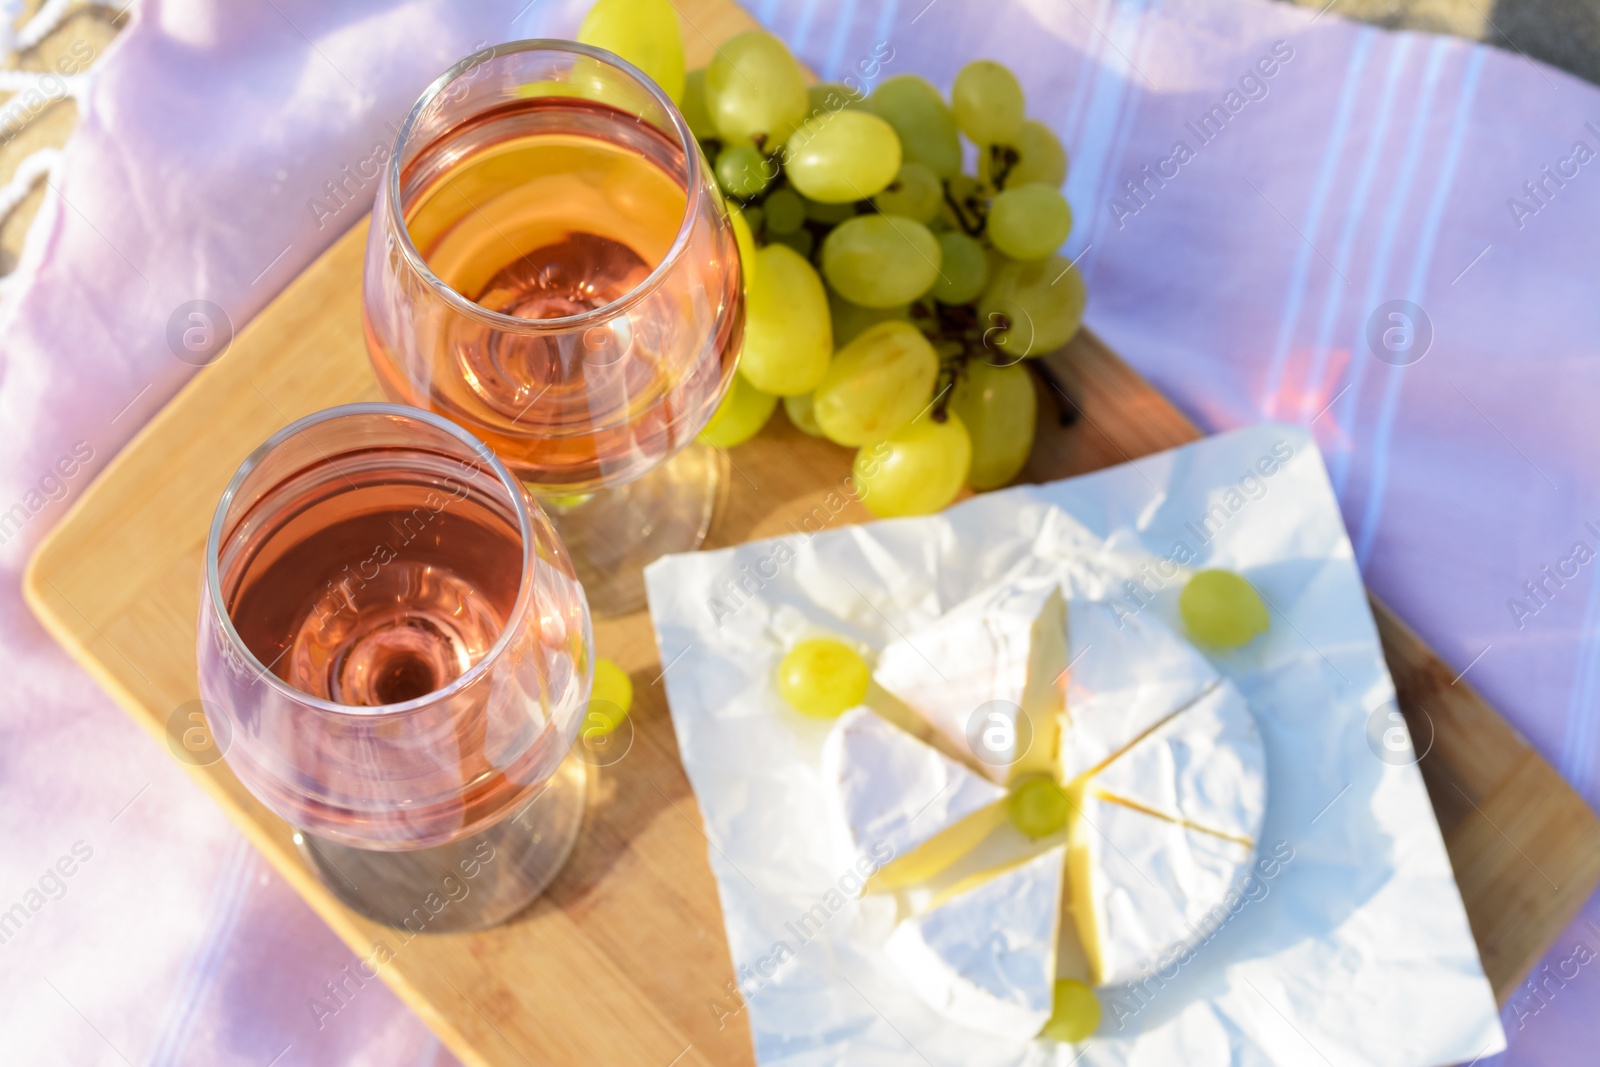 Photo of Glasses with rose wine and snacks on picnic blanket, above view